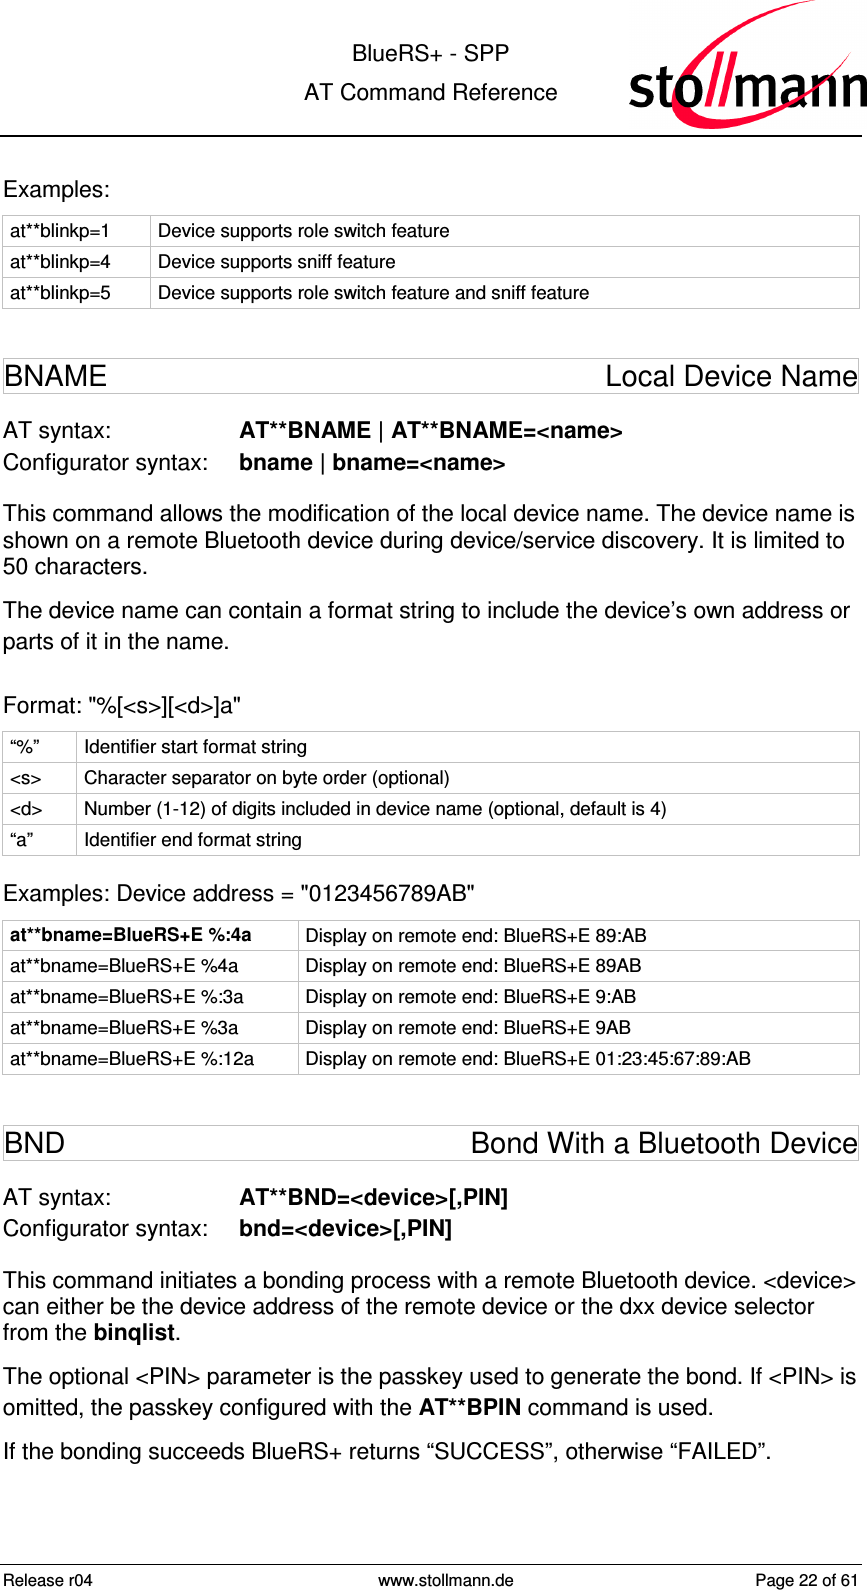  BlueRS+ - SPP AT Command Reference Release r04  www.stollmann.de  Page 22 of 61  Examples: at**blinkp=1  Device supports role switch feature at**blinkp=4  Device supports sniff feature at**blinkp=5  Device supports role switch feature and sniff feature BNAME  Local Device Name AT syntax:  AT**BNAME | AT**BNAME=&lt;name&gt; Configurator syntax:  bname | bname=&lt;name&gt; This command allows the modification of the local device name. The device name is shown on a remote Bluetooth device during device/service discovery. It is limited to 50 characters. The device name can contain a format string to include the device’s own address or parts of it in the name.  Format: &quot;%[&lt;s&gt;][&lt;d&gt;]a&quot; “%”  Identifier start format string &lt;s&gt;  Character separator on byte order (optional) &lt;d&gt;  Number (1-12) of digits included in device name (optional, default is 4) “a”  Identifier end format string Examples: Device address = &quot;0123456789AB&quot; at**bname=BlueRS+E %:4a  Display on remote end: BlueRS+E 89:AB at**bname=BlueRS+E %4a  Display on remote end: BlueRS+E 89AB at**bname=BlueRS+E %:3a  Display on remote end: BlueRS+E 9:AB at**bname=BlueRS+E %3a  Display on remote end: BlueRS+E 9AB at**bname=BlueRS+E %:12a  Display on remote end: BlueRS+E 01:23:45:67:89:AB BND  Bond With a Bluetooth Device AT syntax:  AT**BND=&lt;device&gt;[,PIN] Configurator syntax:  bnd=&lt;device&gt;[,PIN] This command initiates a bonding process with a remote Bluetooth device. &lt;device&gt; can either be the device address of the remote device or the dxx device selector from the binqlist. The optional &lt;PIN&gt; parameter is the passkey used to generate the bond. If &lt;PIN&gt; is omitted, the passkey configured with the AT**BPIN command is used. If the bonding succeeds BlueRS+ returns “SUCCESS”, otherwise “FAILED”.  